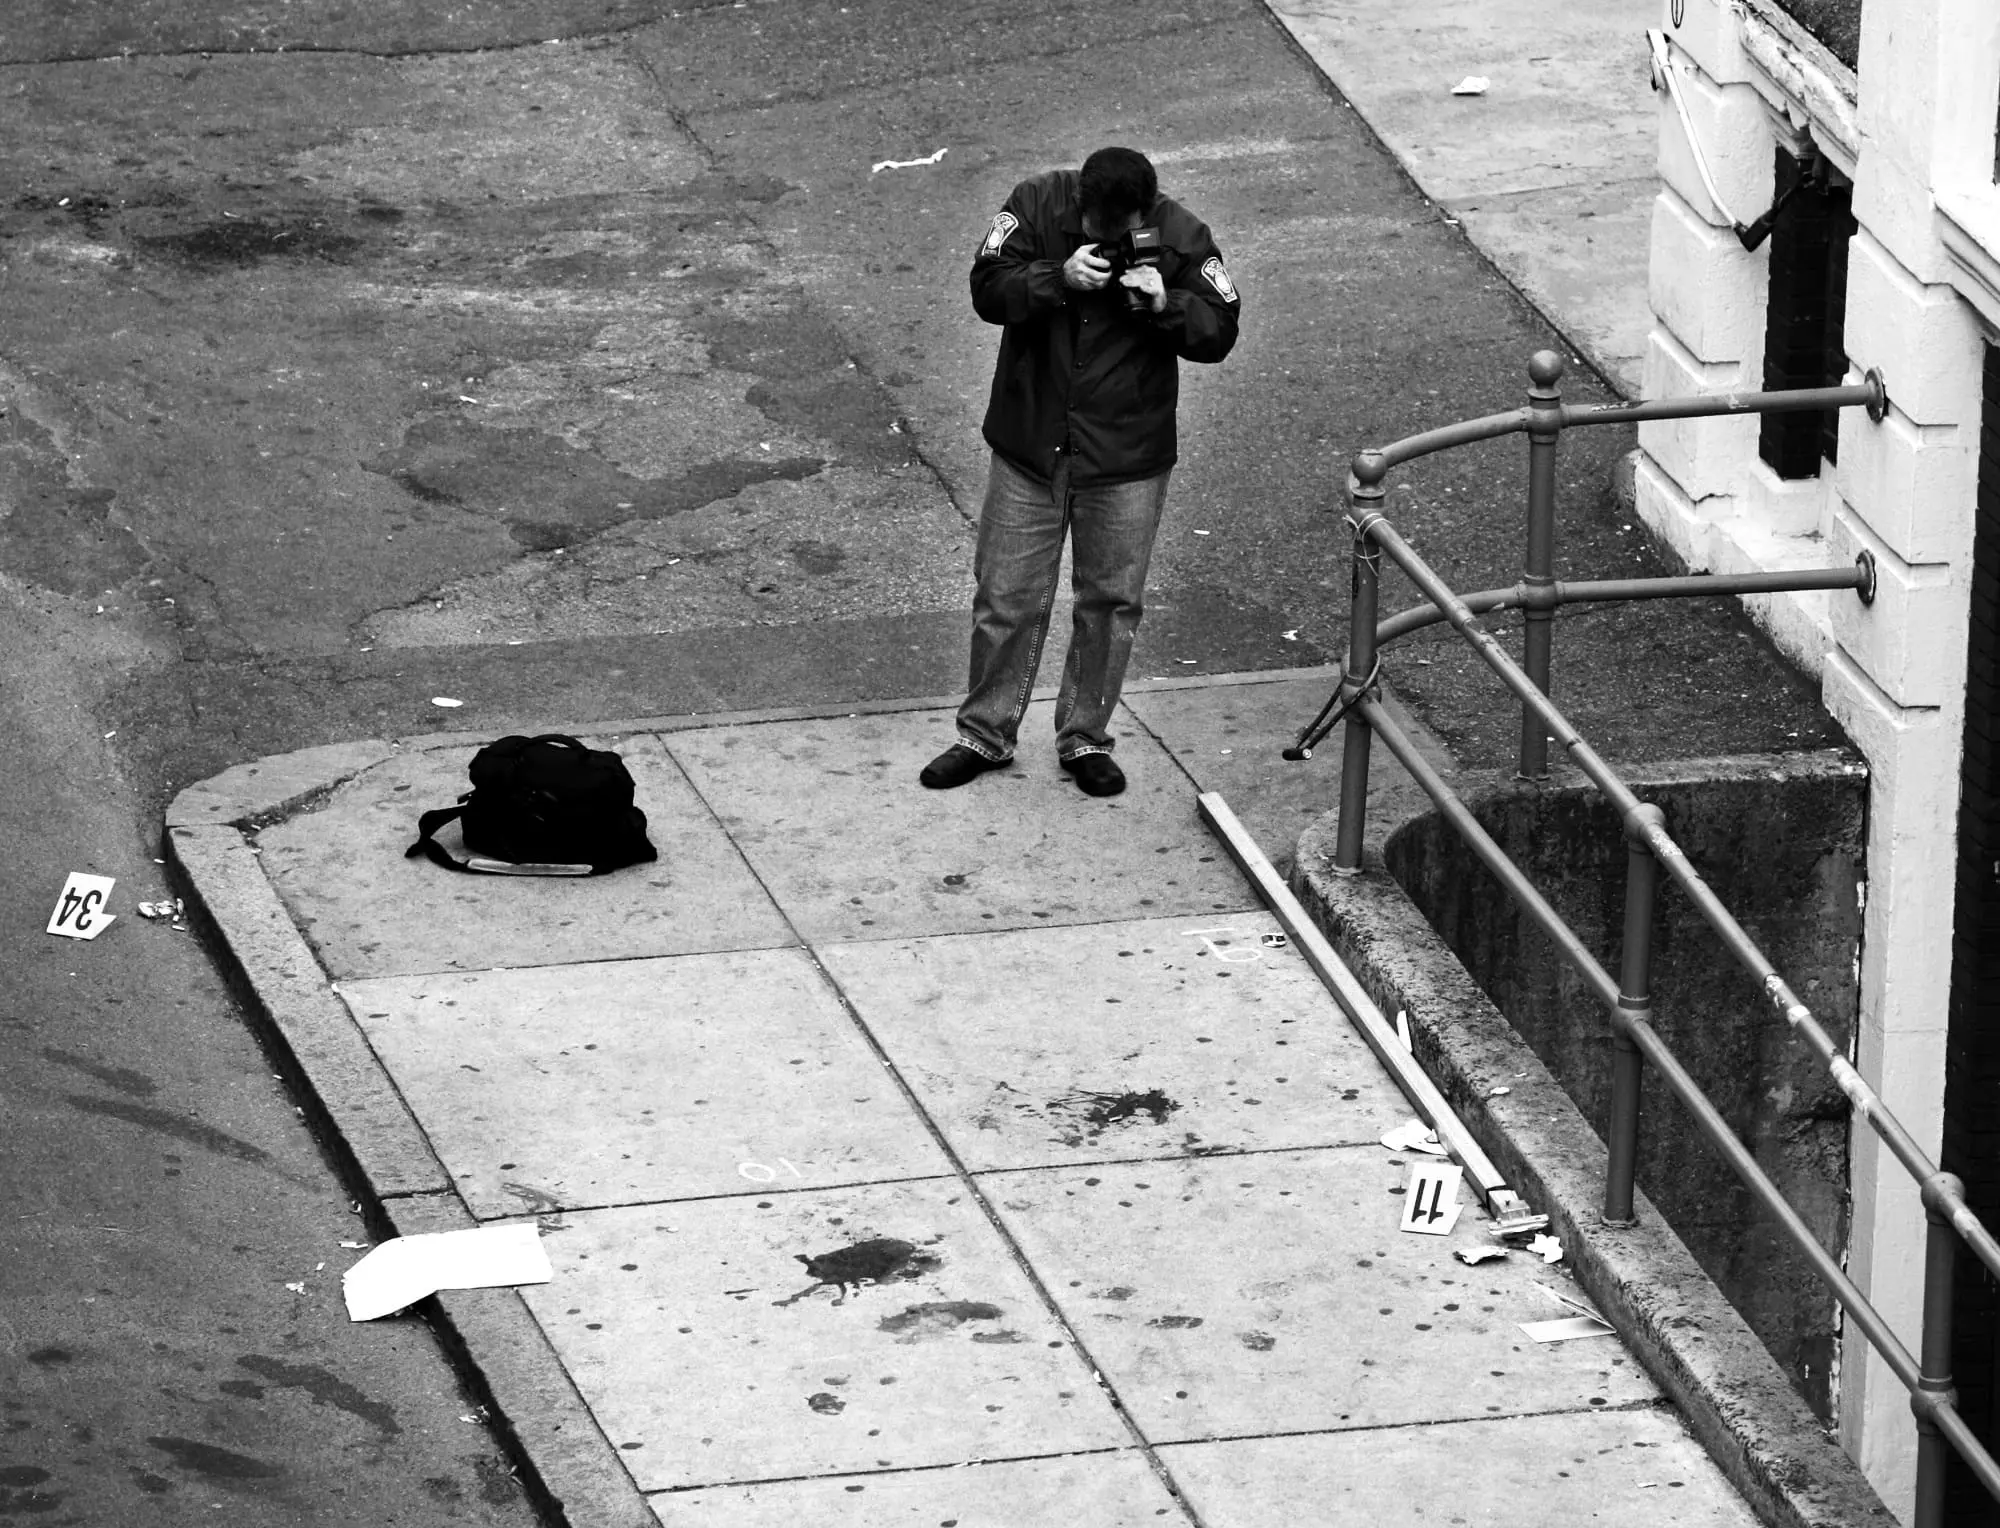 A Boston Police detective photographs the crime scene outside Fenway Park where Snelgrove was killed by an officer firing a less-lethal weapon.